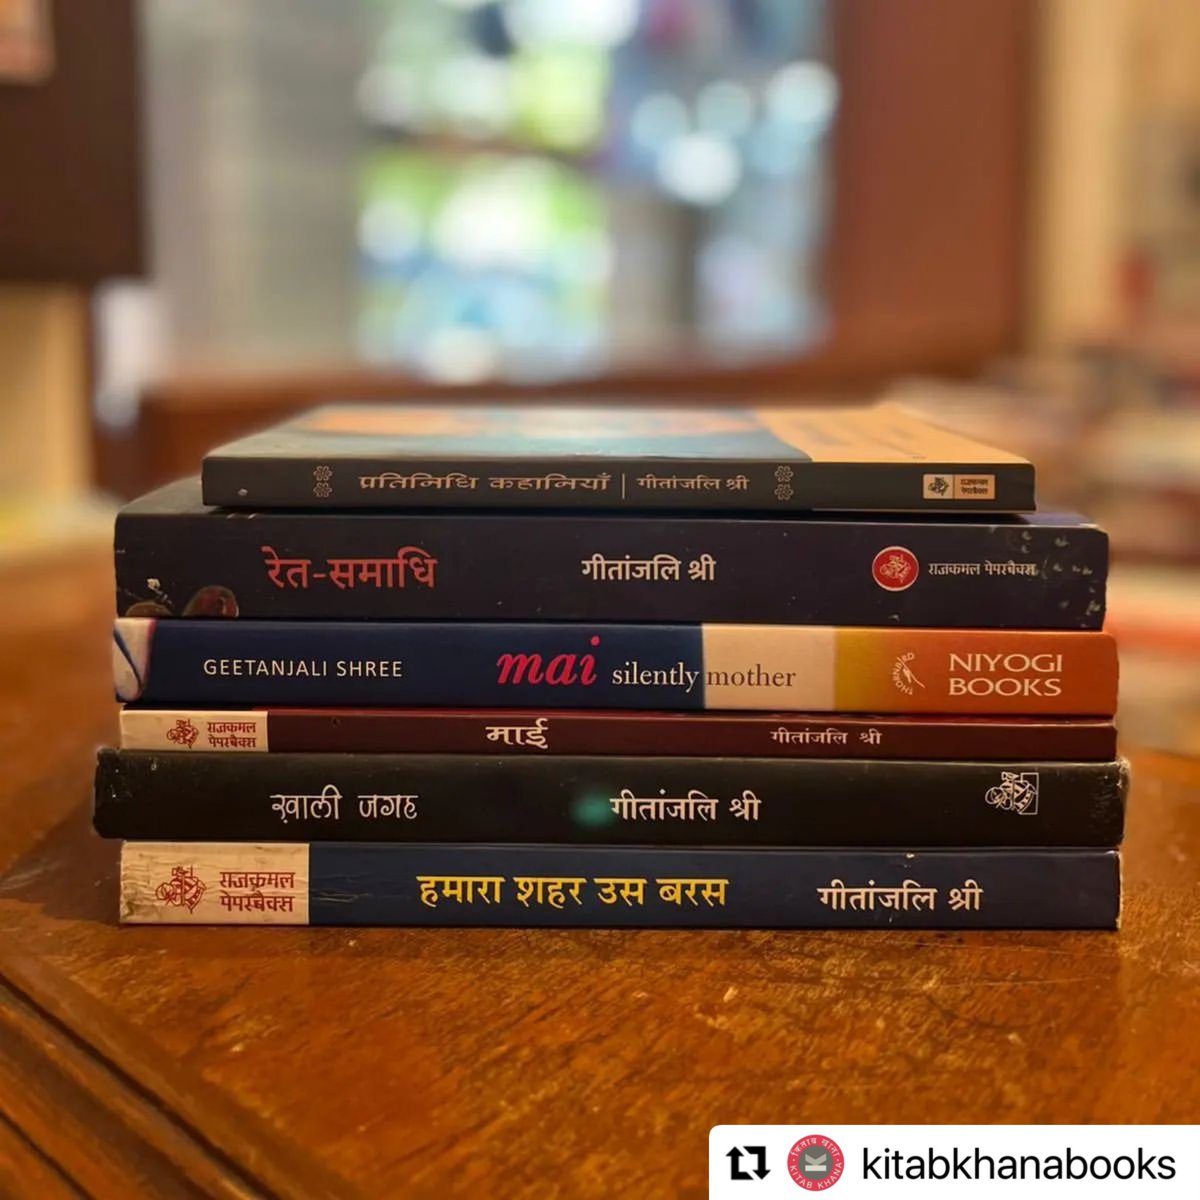 #Repost @KitabKhanaBooks 
・・・
While we’re restocking copies of #TombofSand, here's a look at the other works of #GeetanjaliShree you can indulge in this week.

#GeetanjaliShree #2022InternationalBooker #kitabkhana #kitabkhanamumbai #mumbaibookstore #bookstorelife